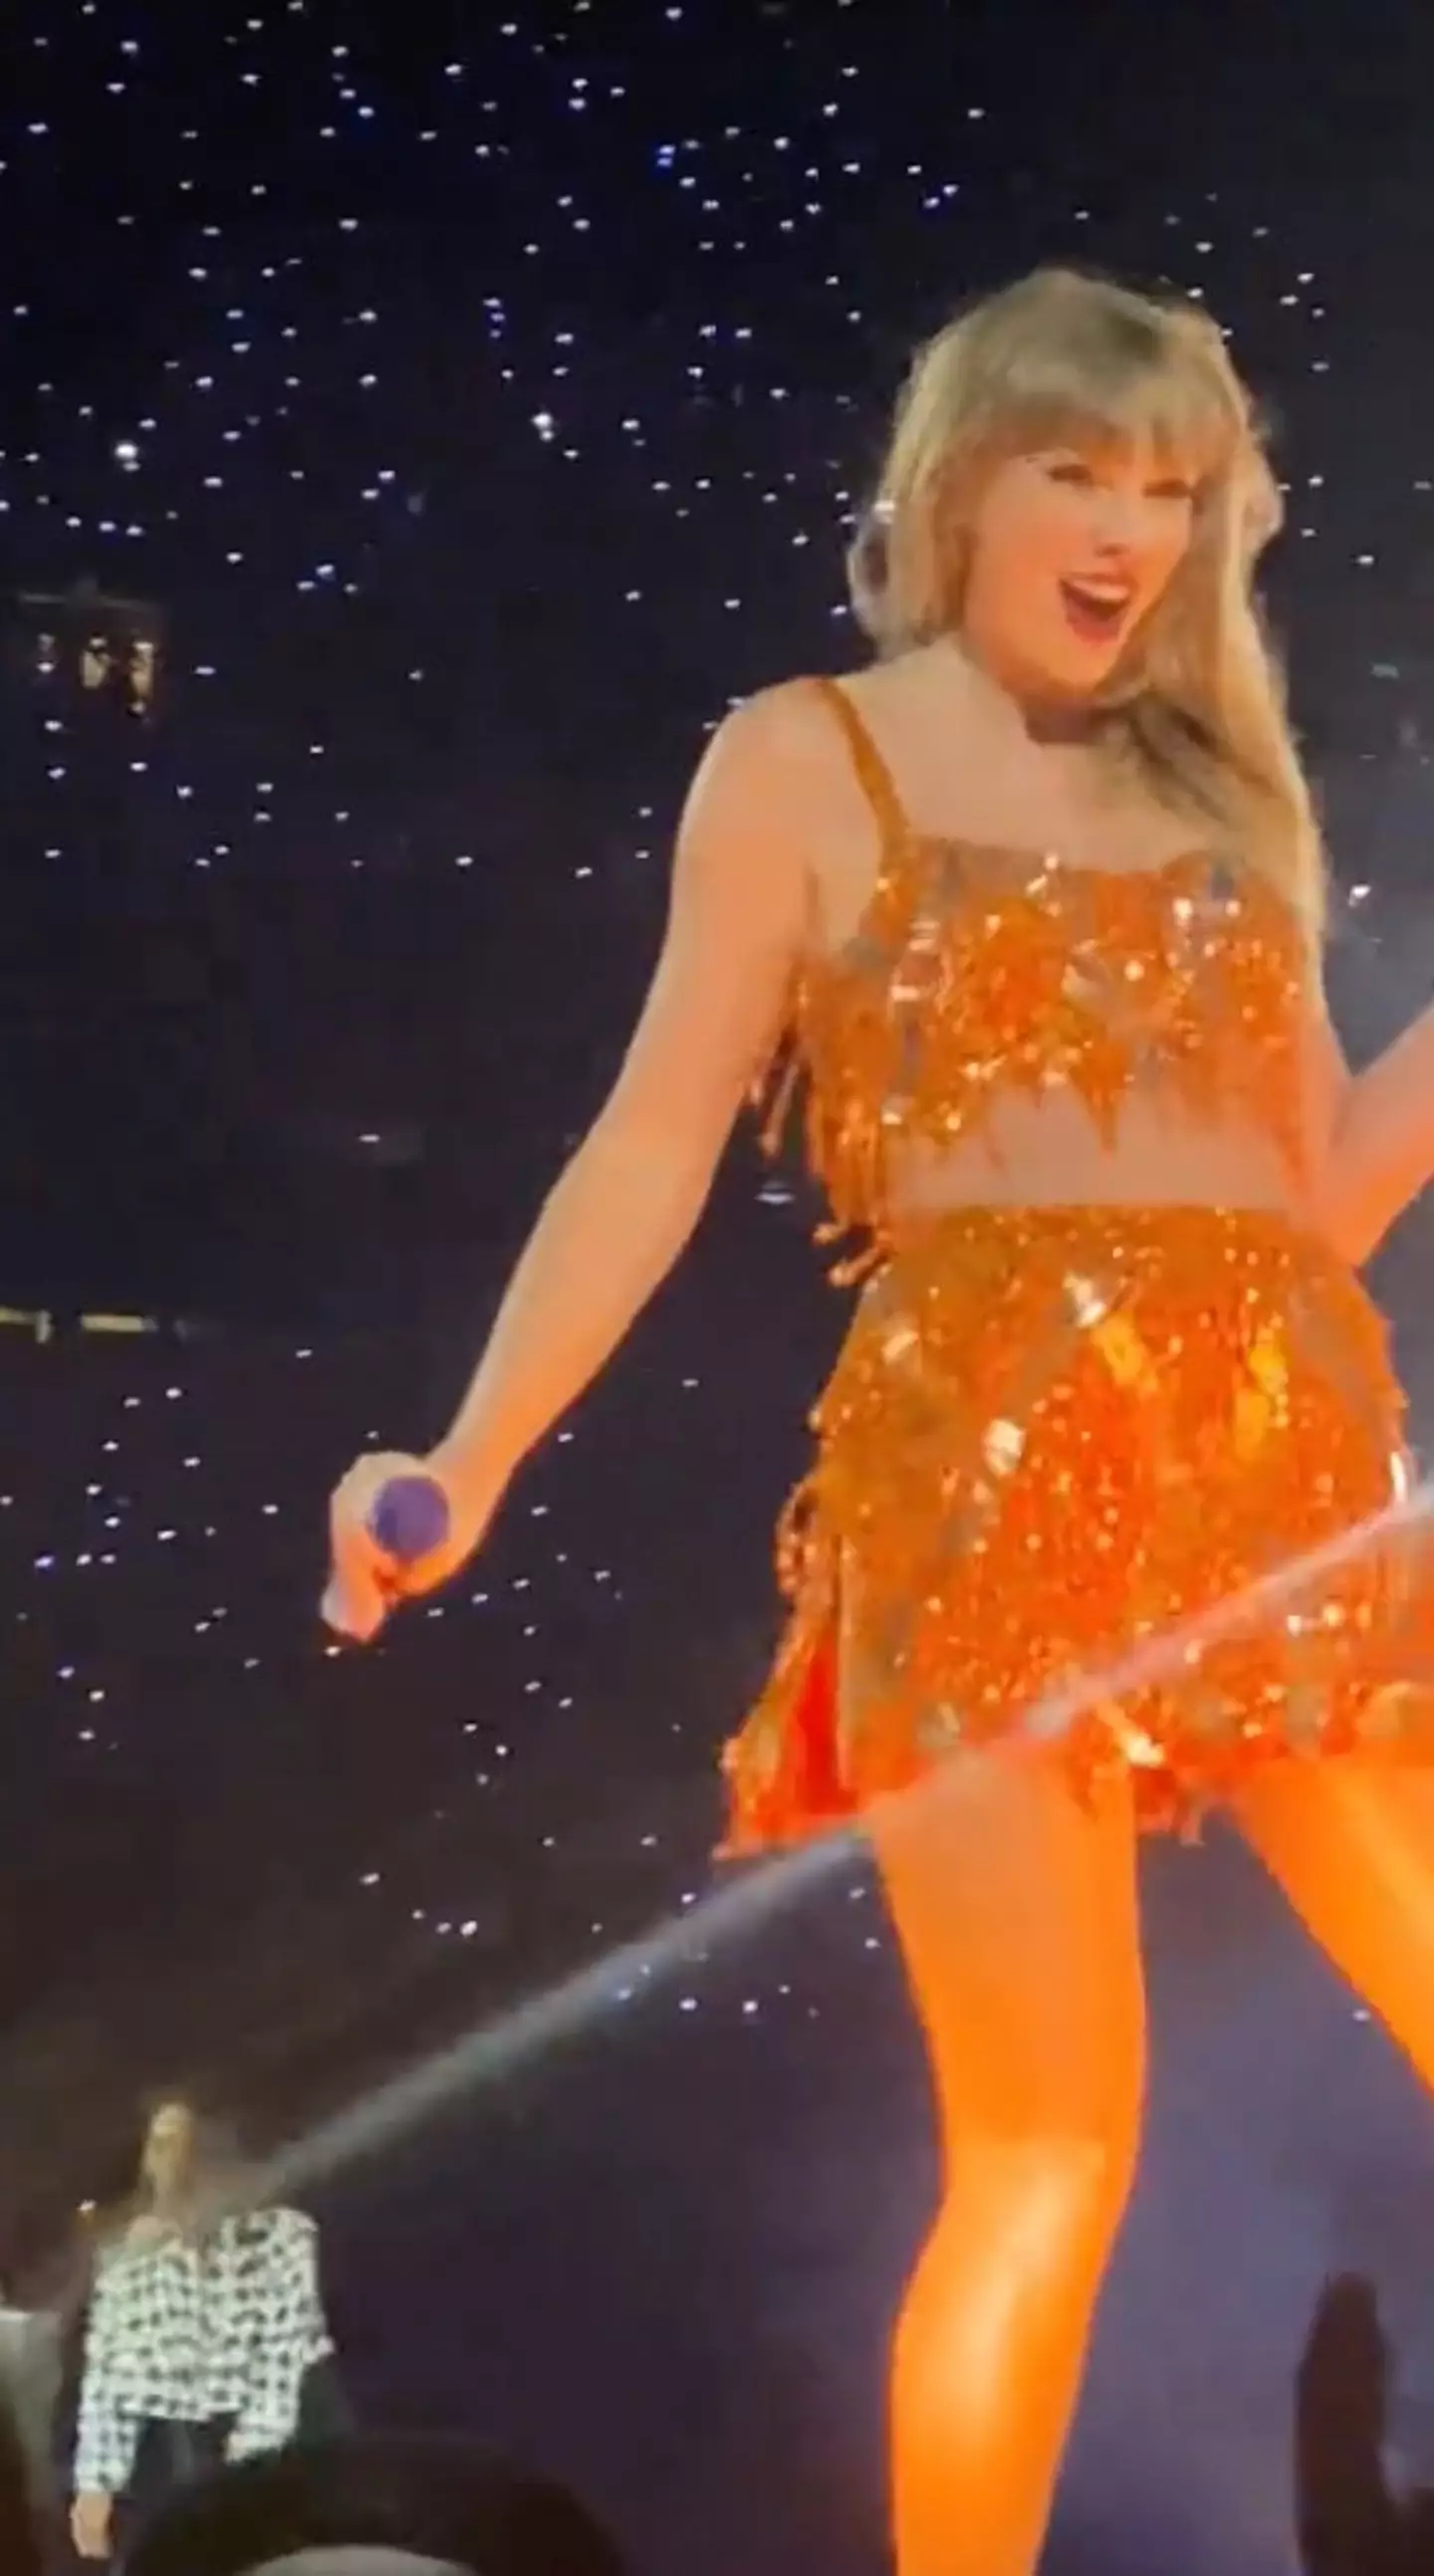 Swifties literally 'shook off' a 2.3 magnitude 'earthquake' at this week's concert in Seattle.